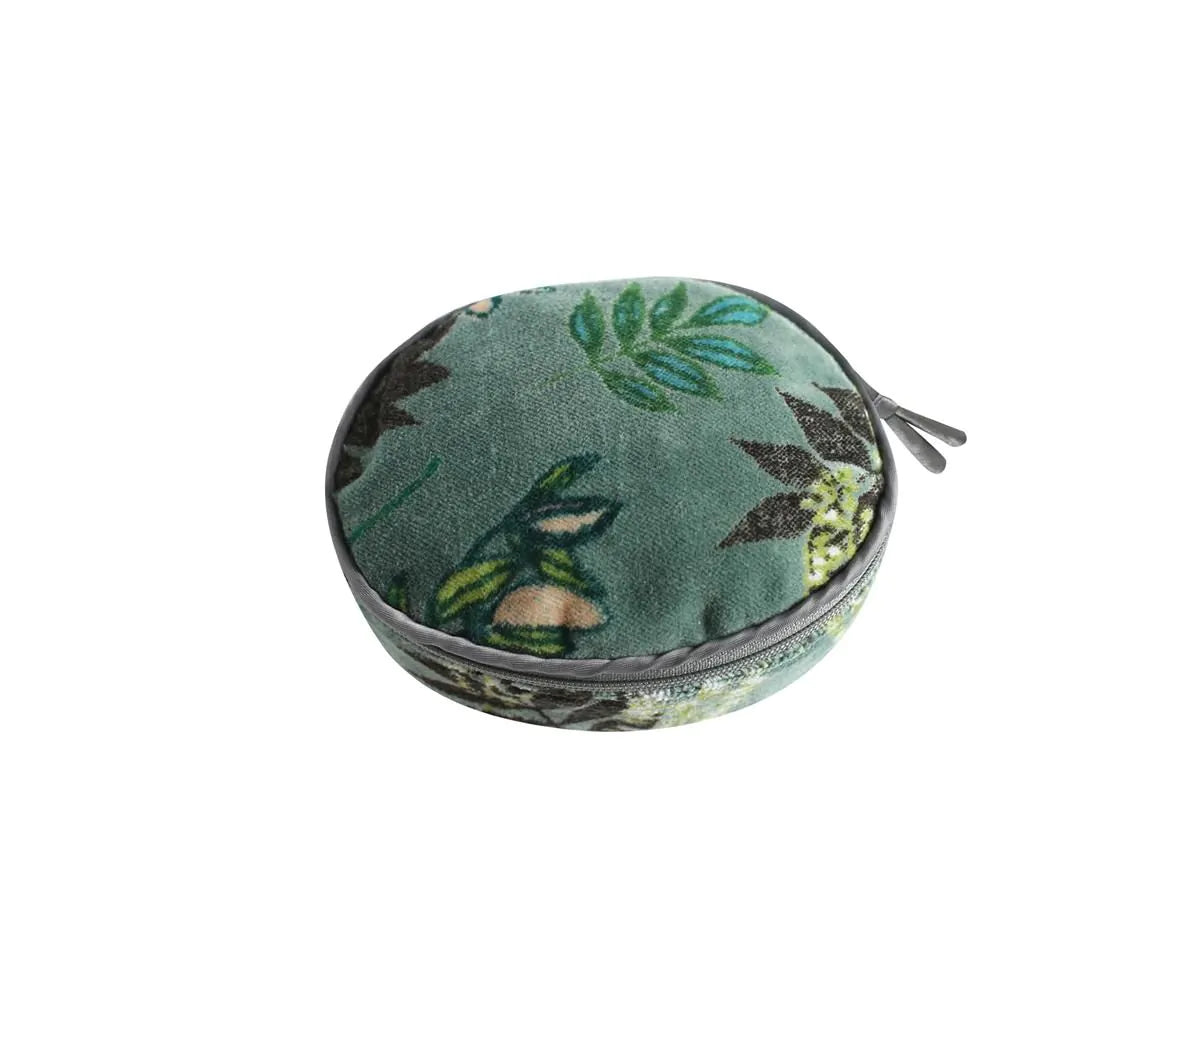 Botanical Velvet Jewellery Pouch or Roll from Earth Squared